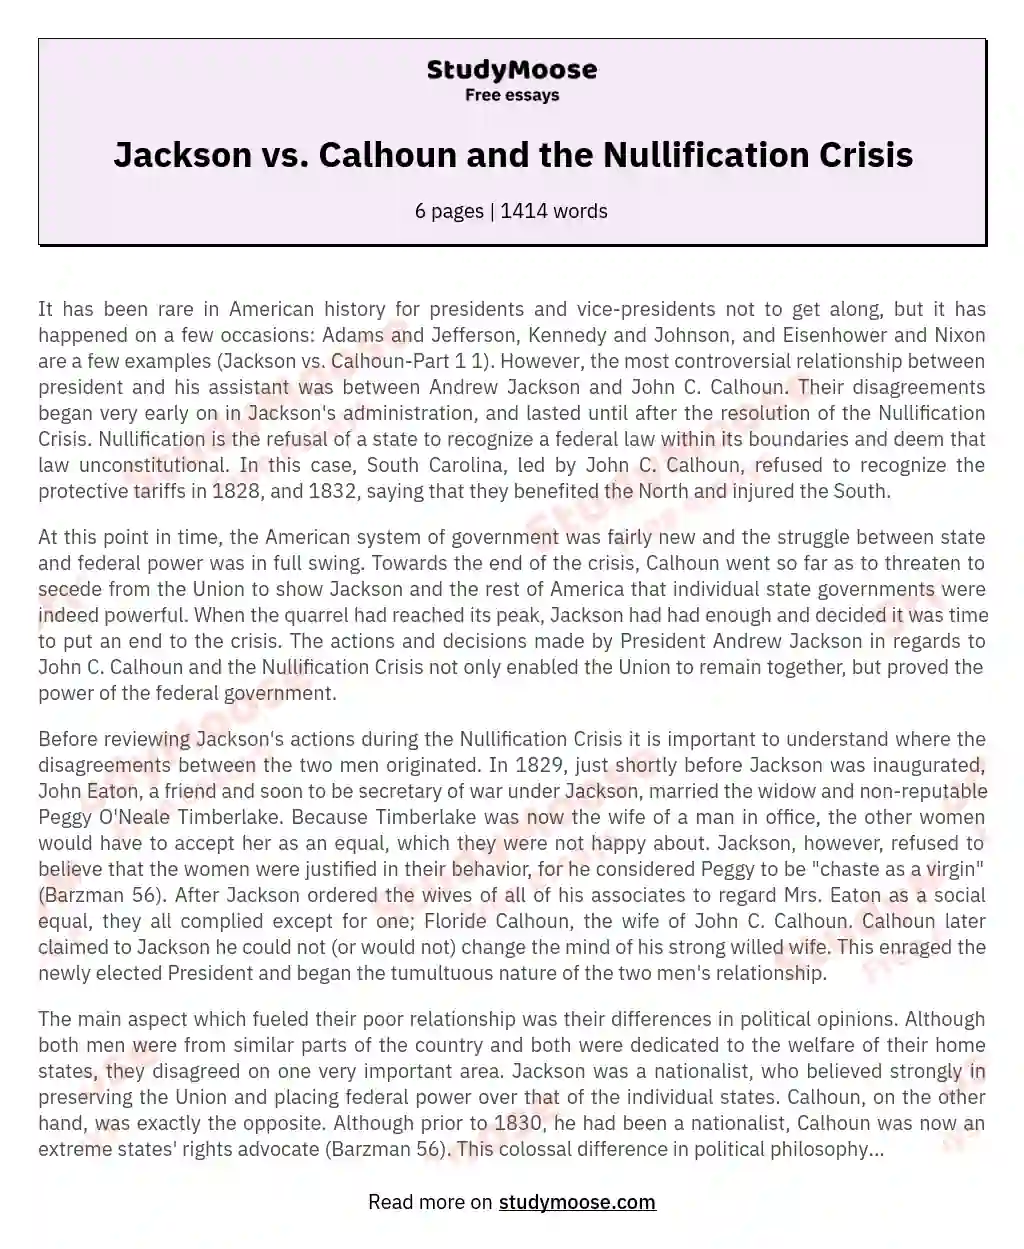 Strained Relations: Jackson vs. Calhoun in the Nullification Crisis essay